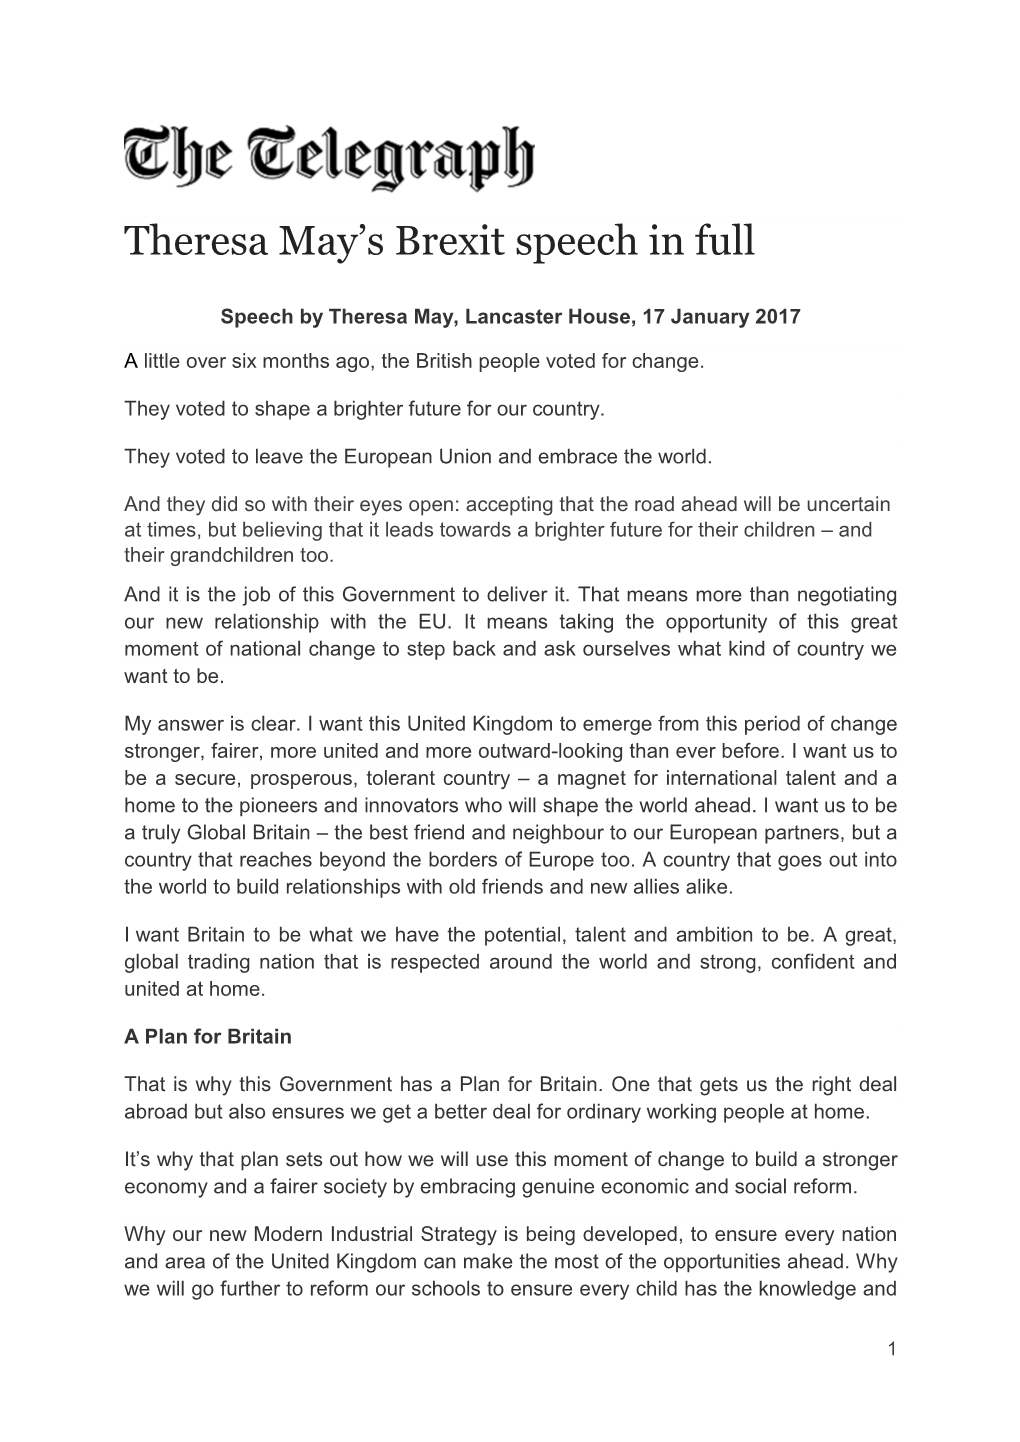 Theresa May's Brexit Speech in Full